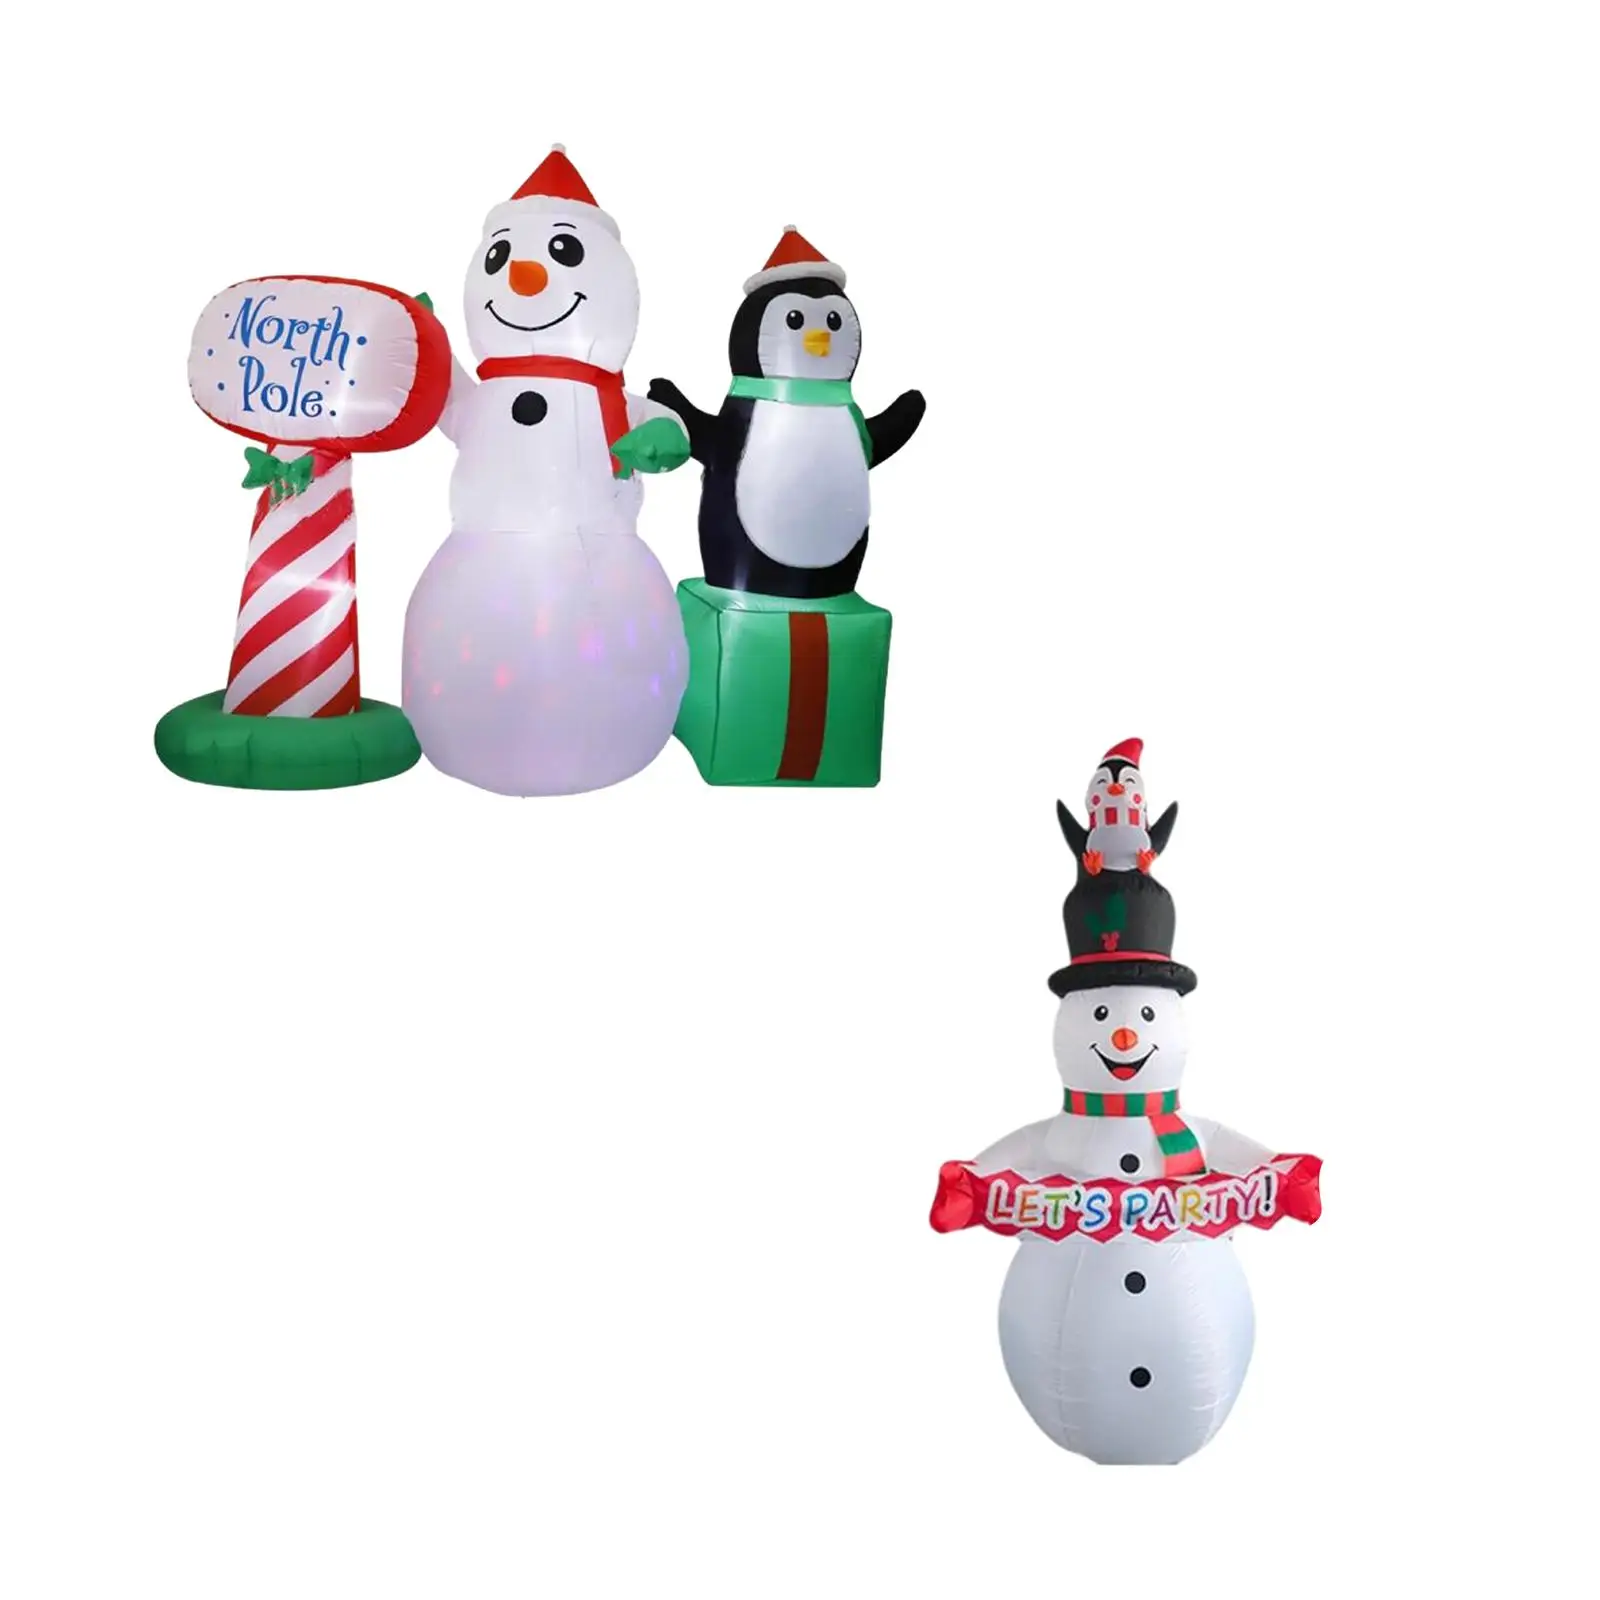 Blow up Snowman with LED Lights Funny Luminous Christmas Inflatable Snowman Christmas Decor for Yard Outside Indoor Garden Patio